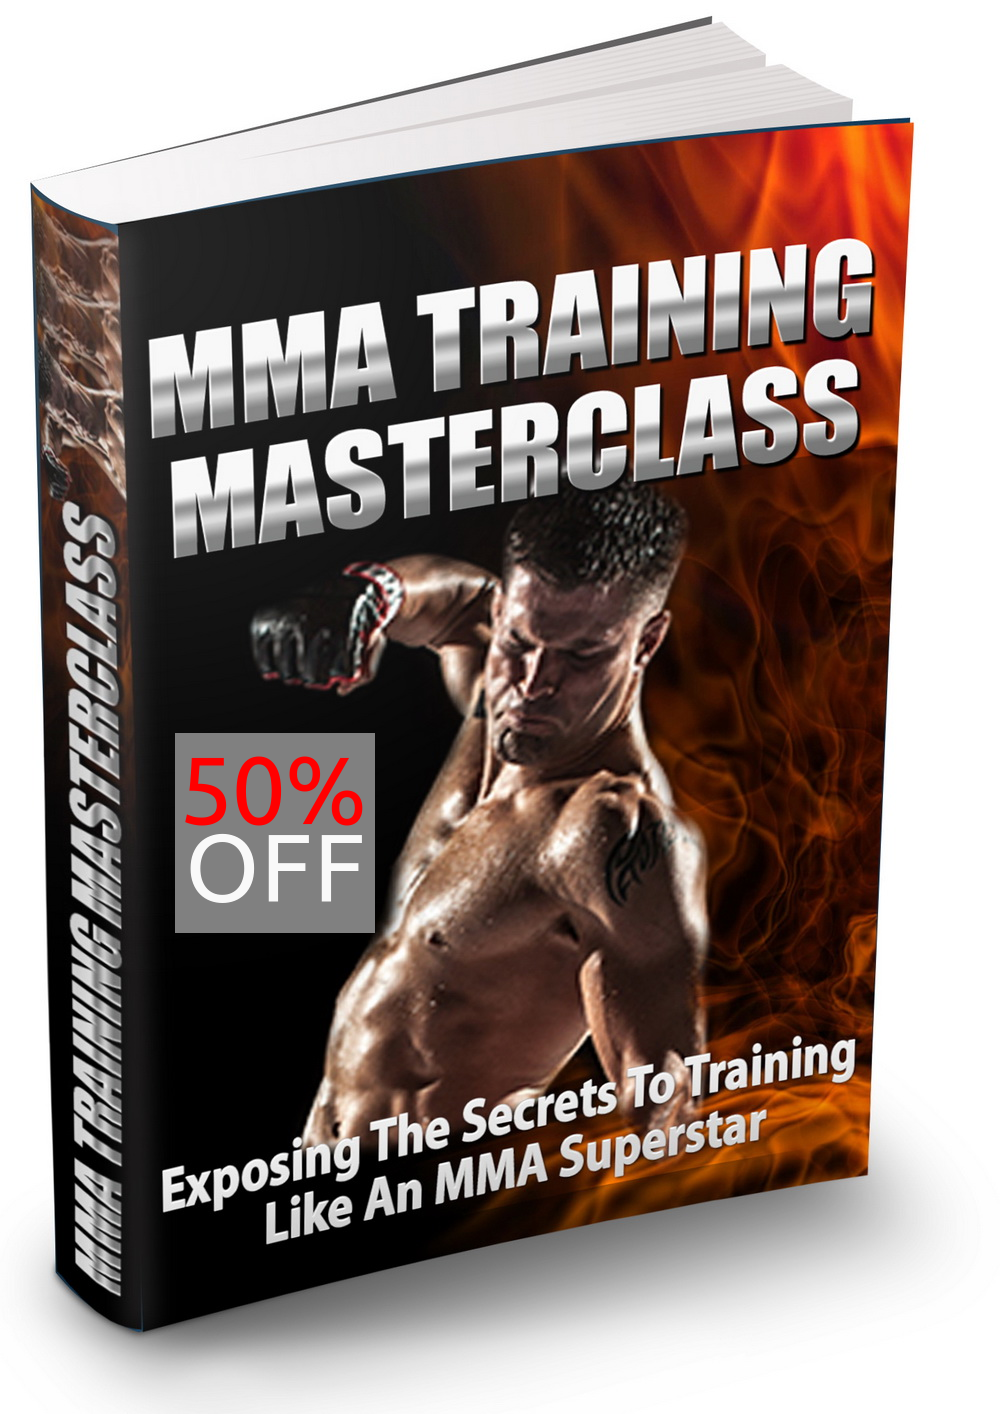 MMA Training Masterclass with Audio Pack.